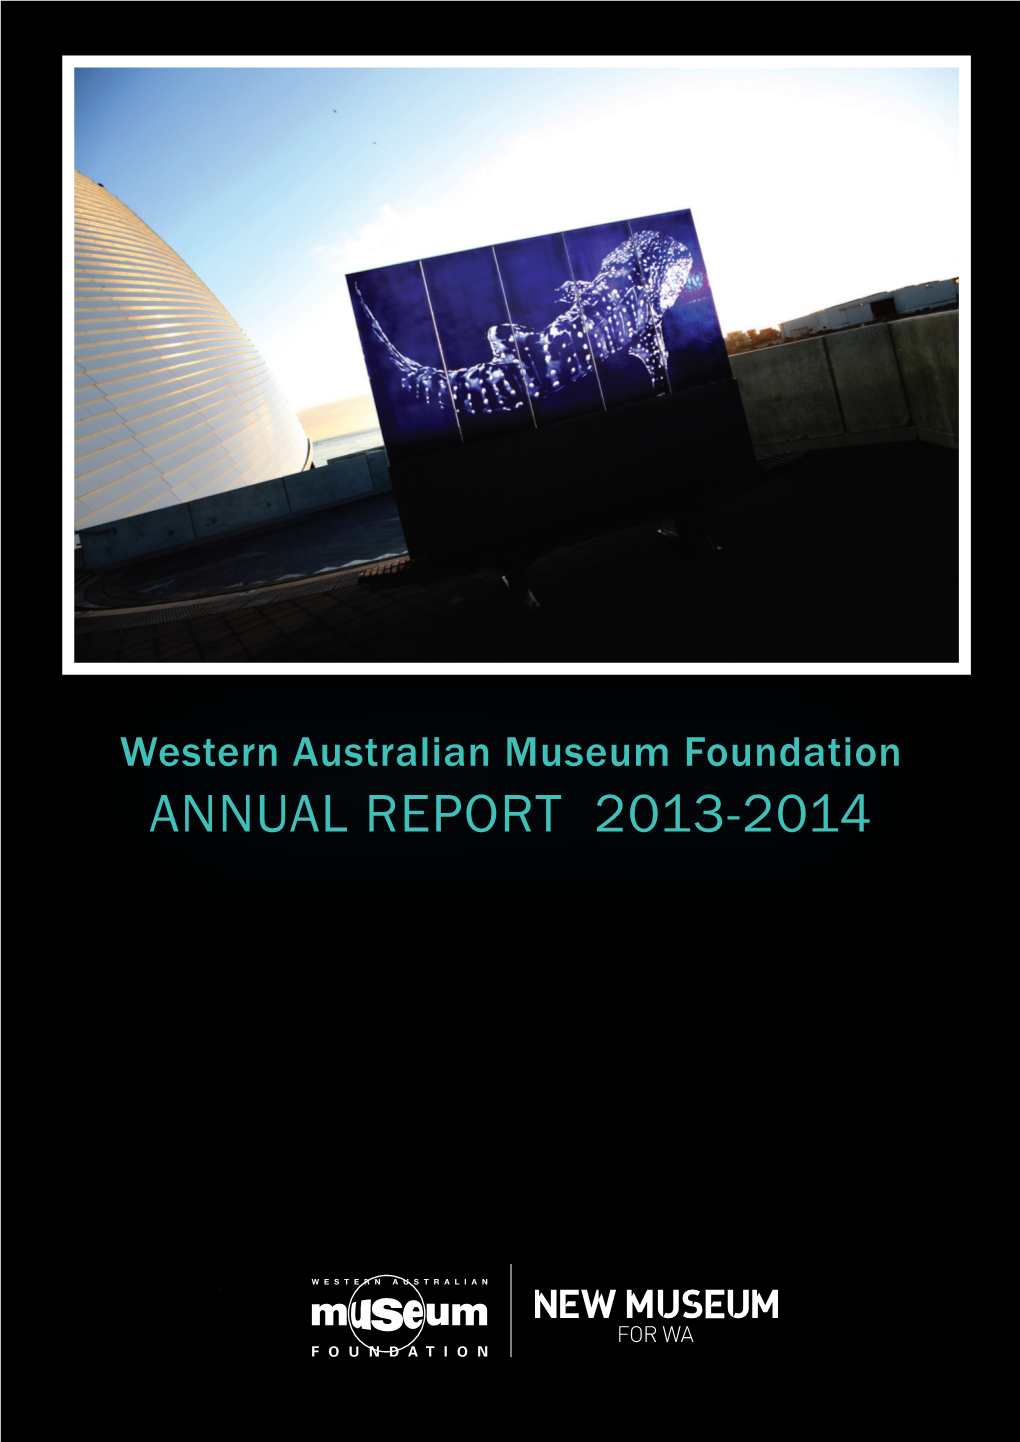 Annual Report 2013-2014 Contents